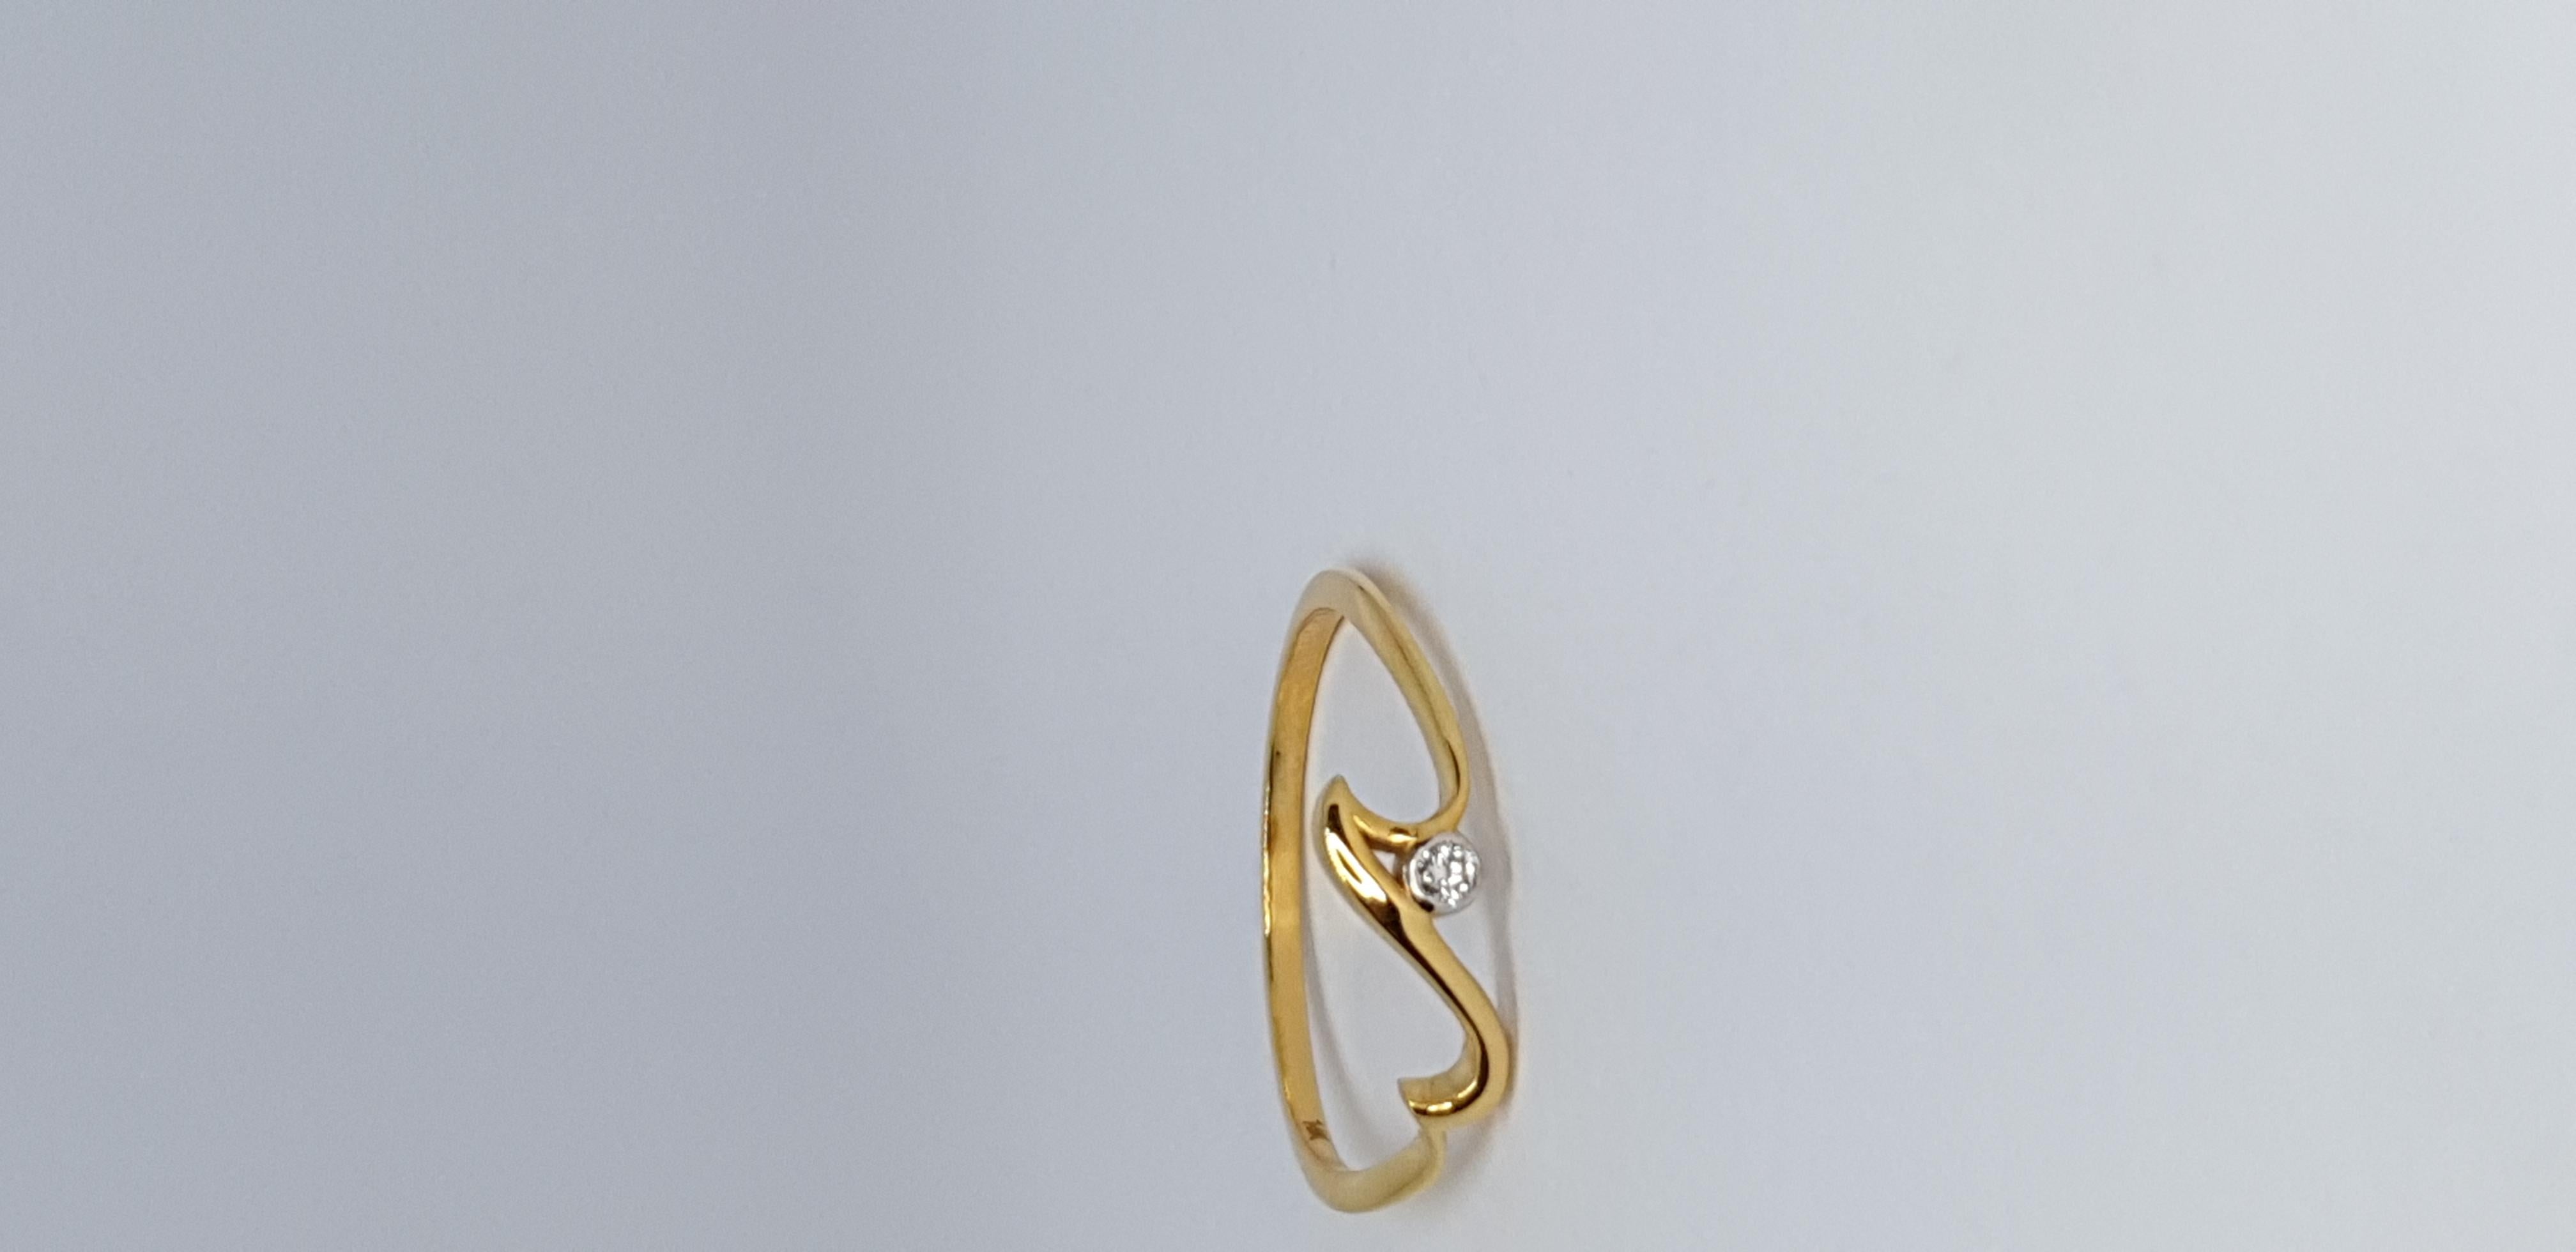 For Sale:  Natural Diamond Wave Ring 14K Solid Gold Dainty Ocean Lover Jewelry Gift. 19